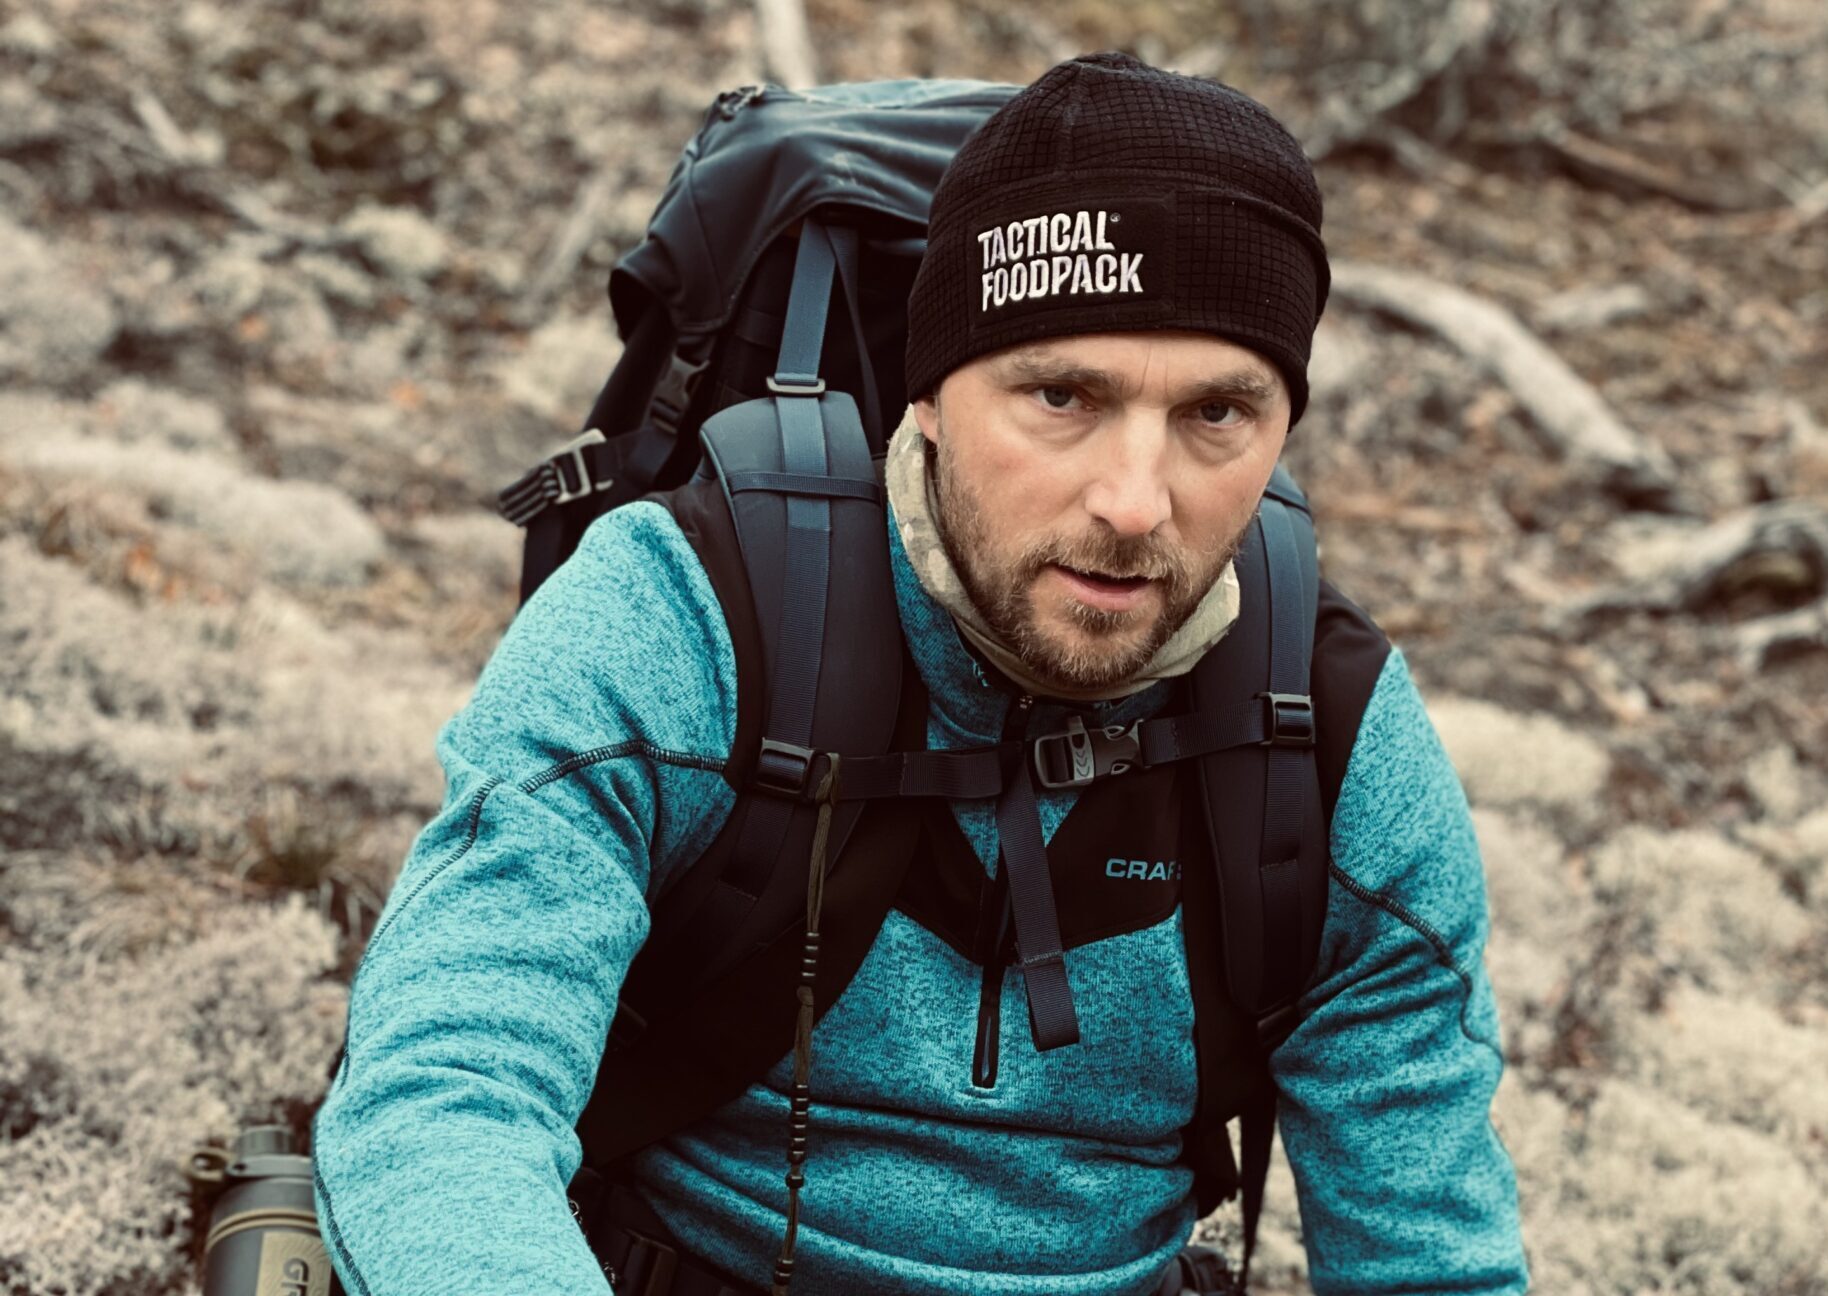 Survival Tips from Tactical Foodpack CEO